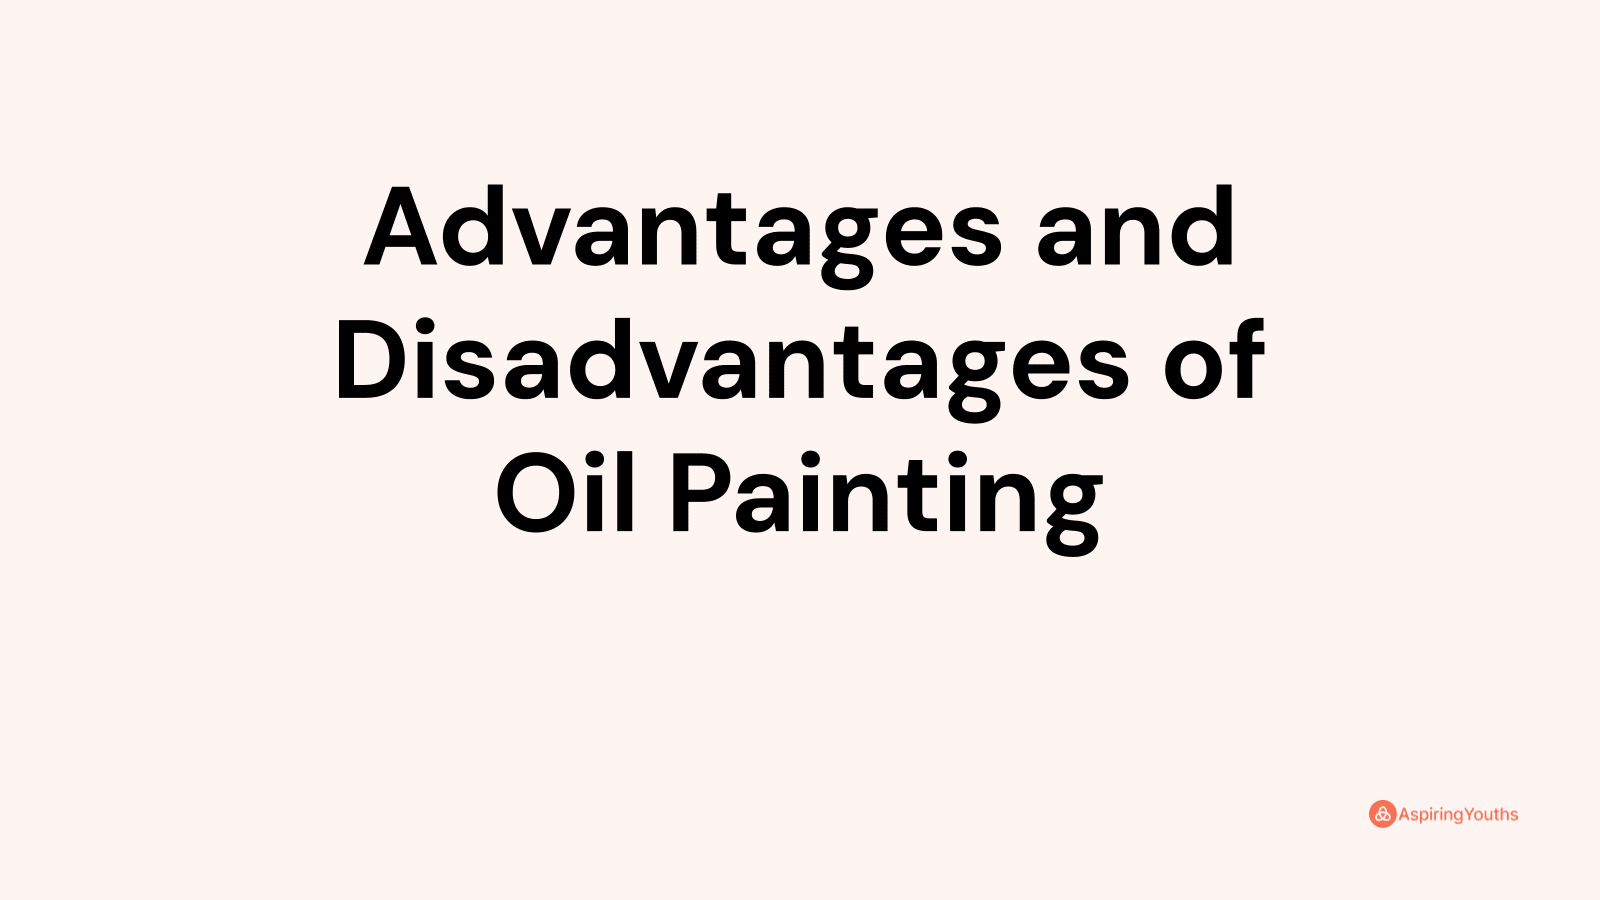 Advantages and disadvantages of Oil Painting